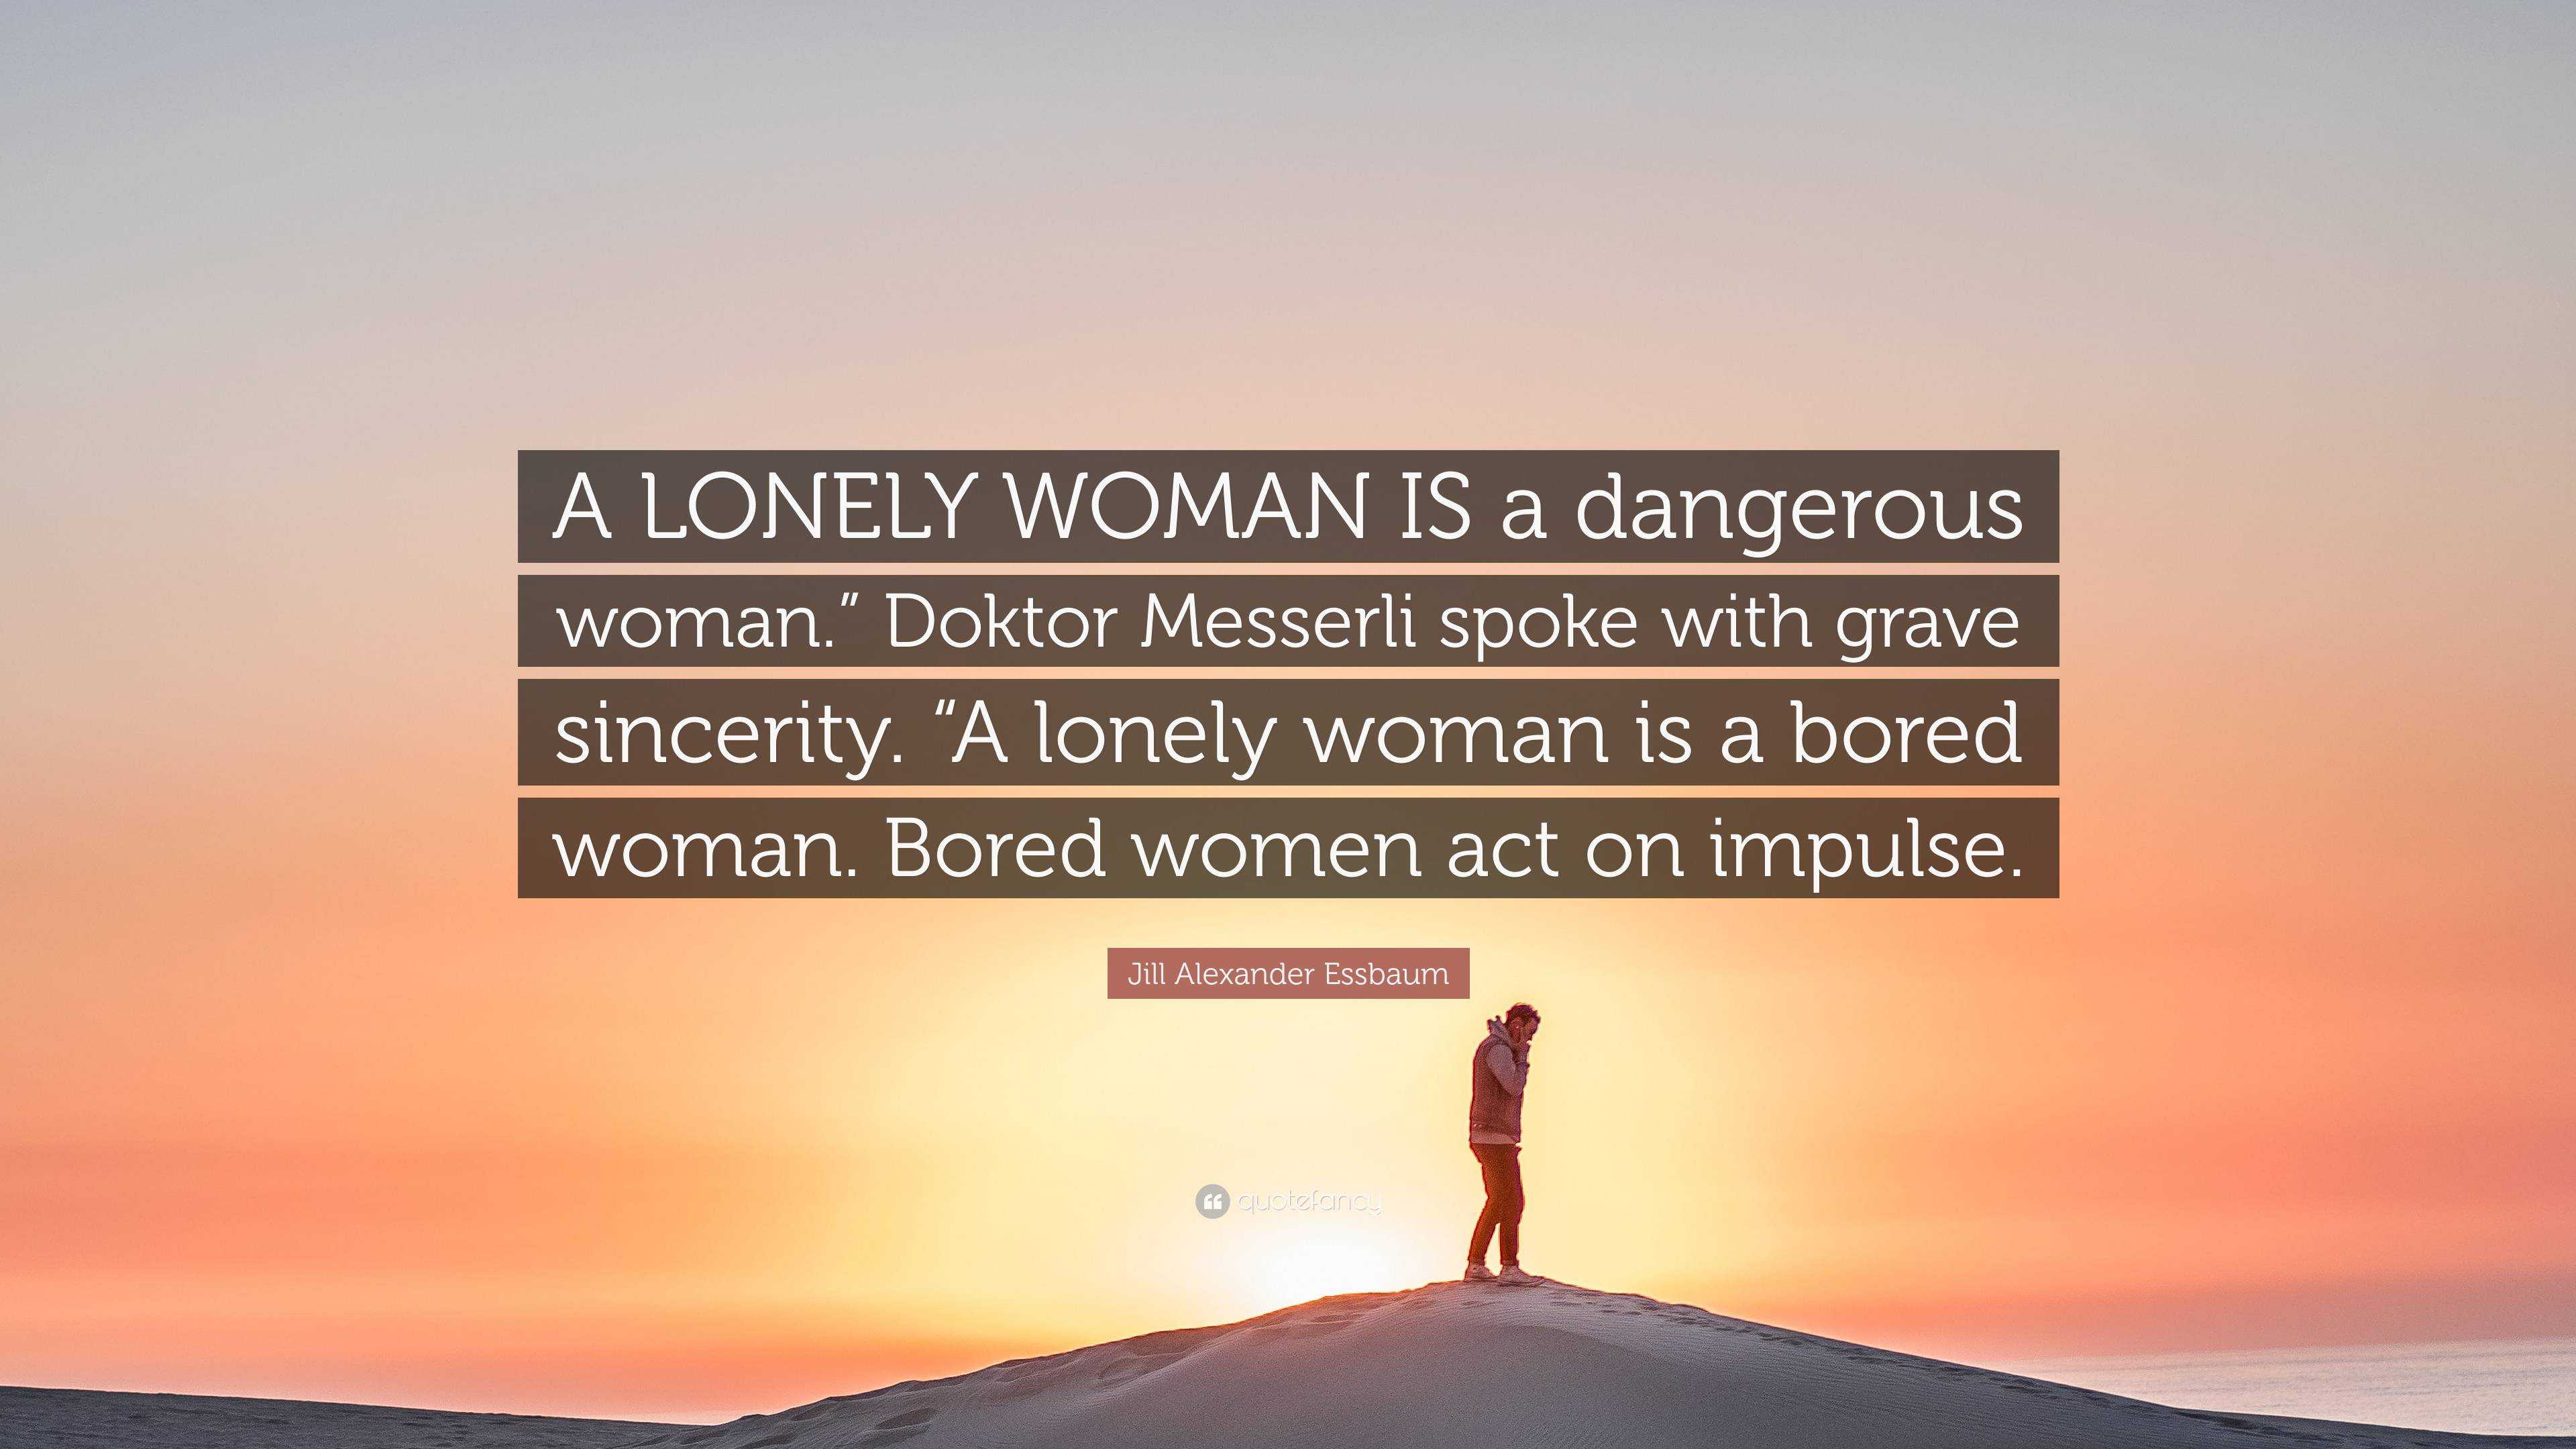 lonely girl quotes cover photos